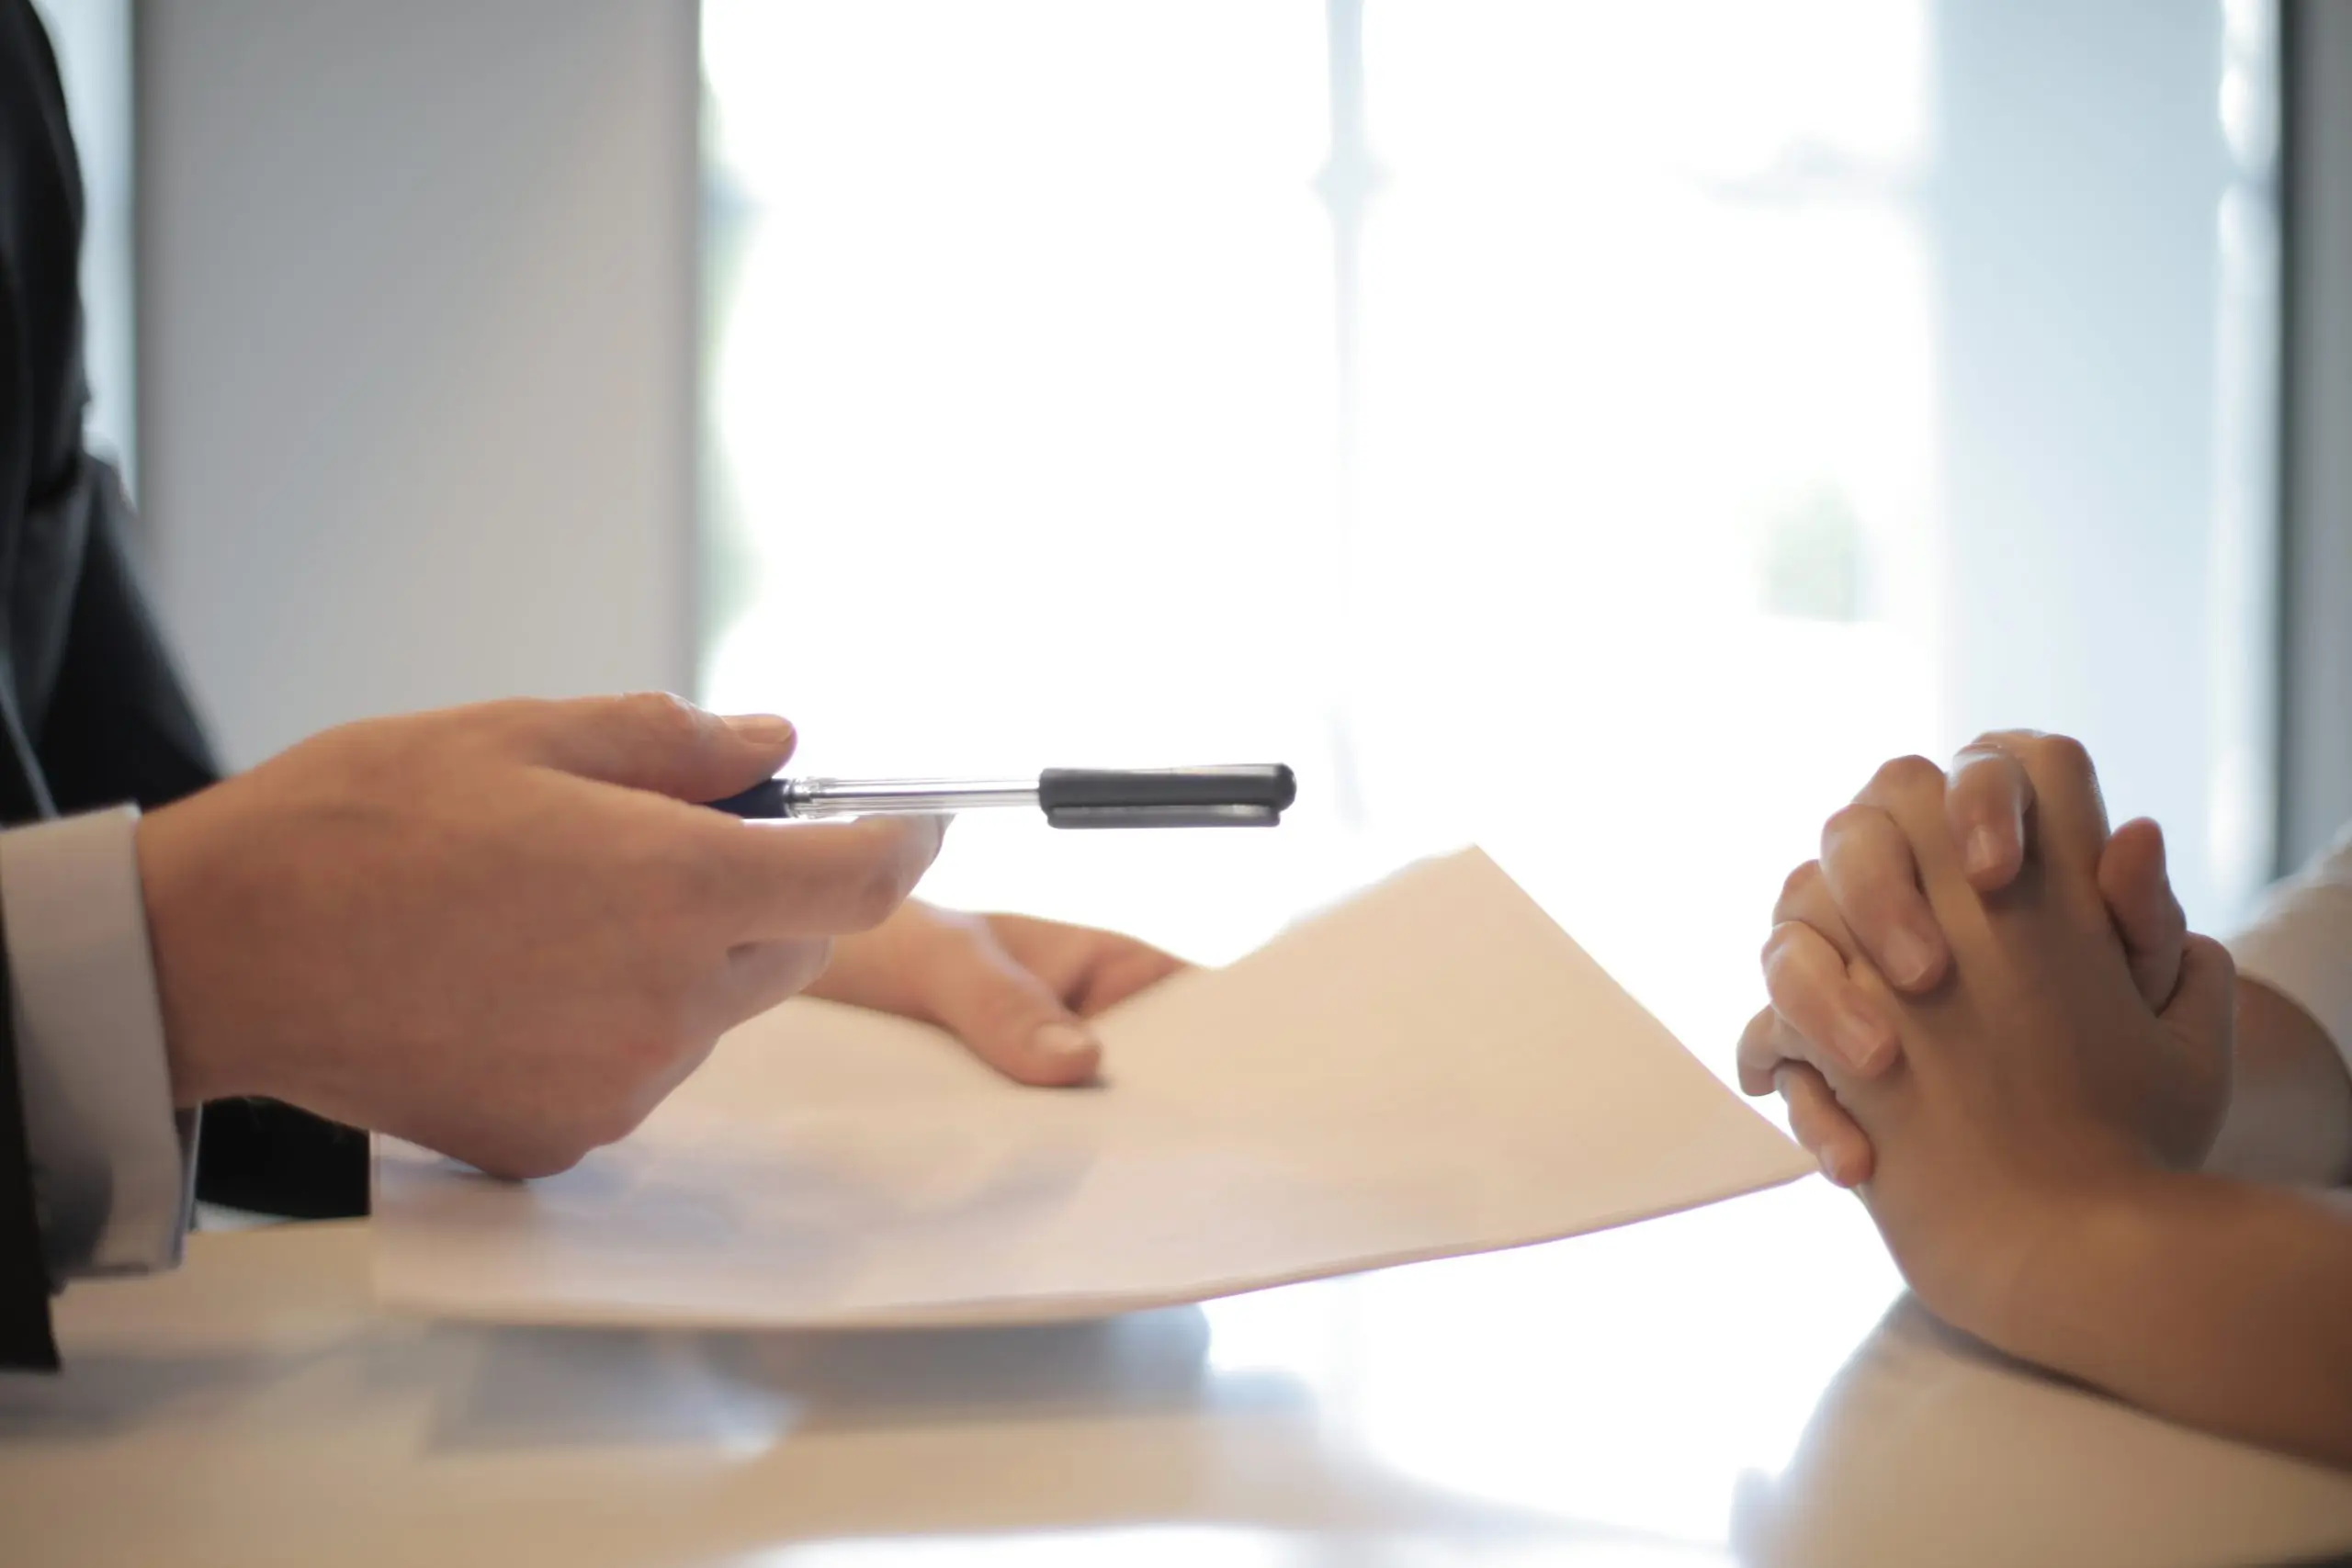 Divorce-Proof Your Real Estate Assets: The Benefits of a Well-Structured Prenuptial Agreement